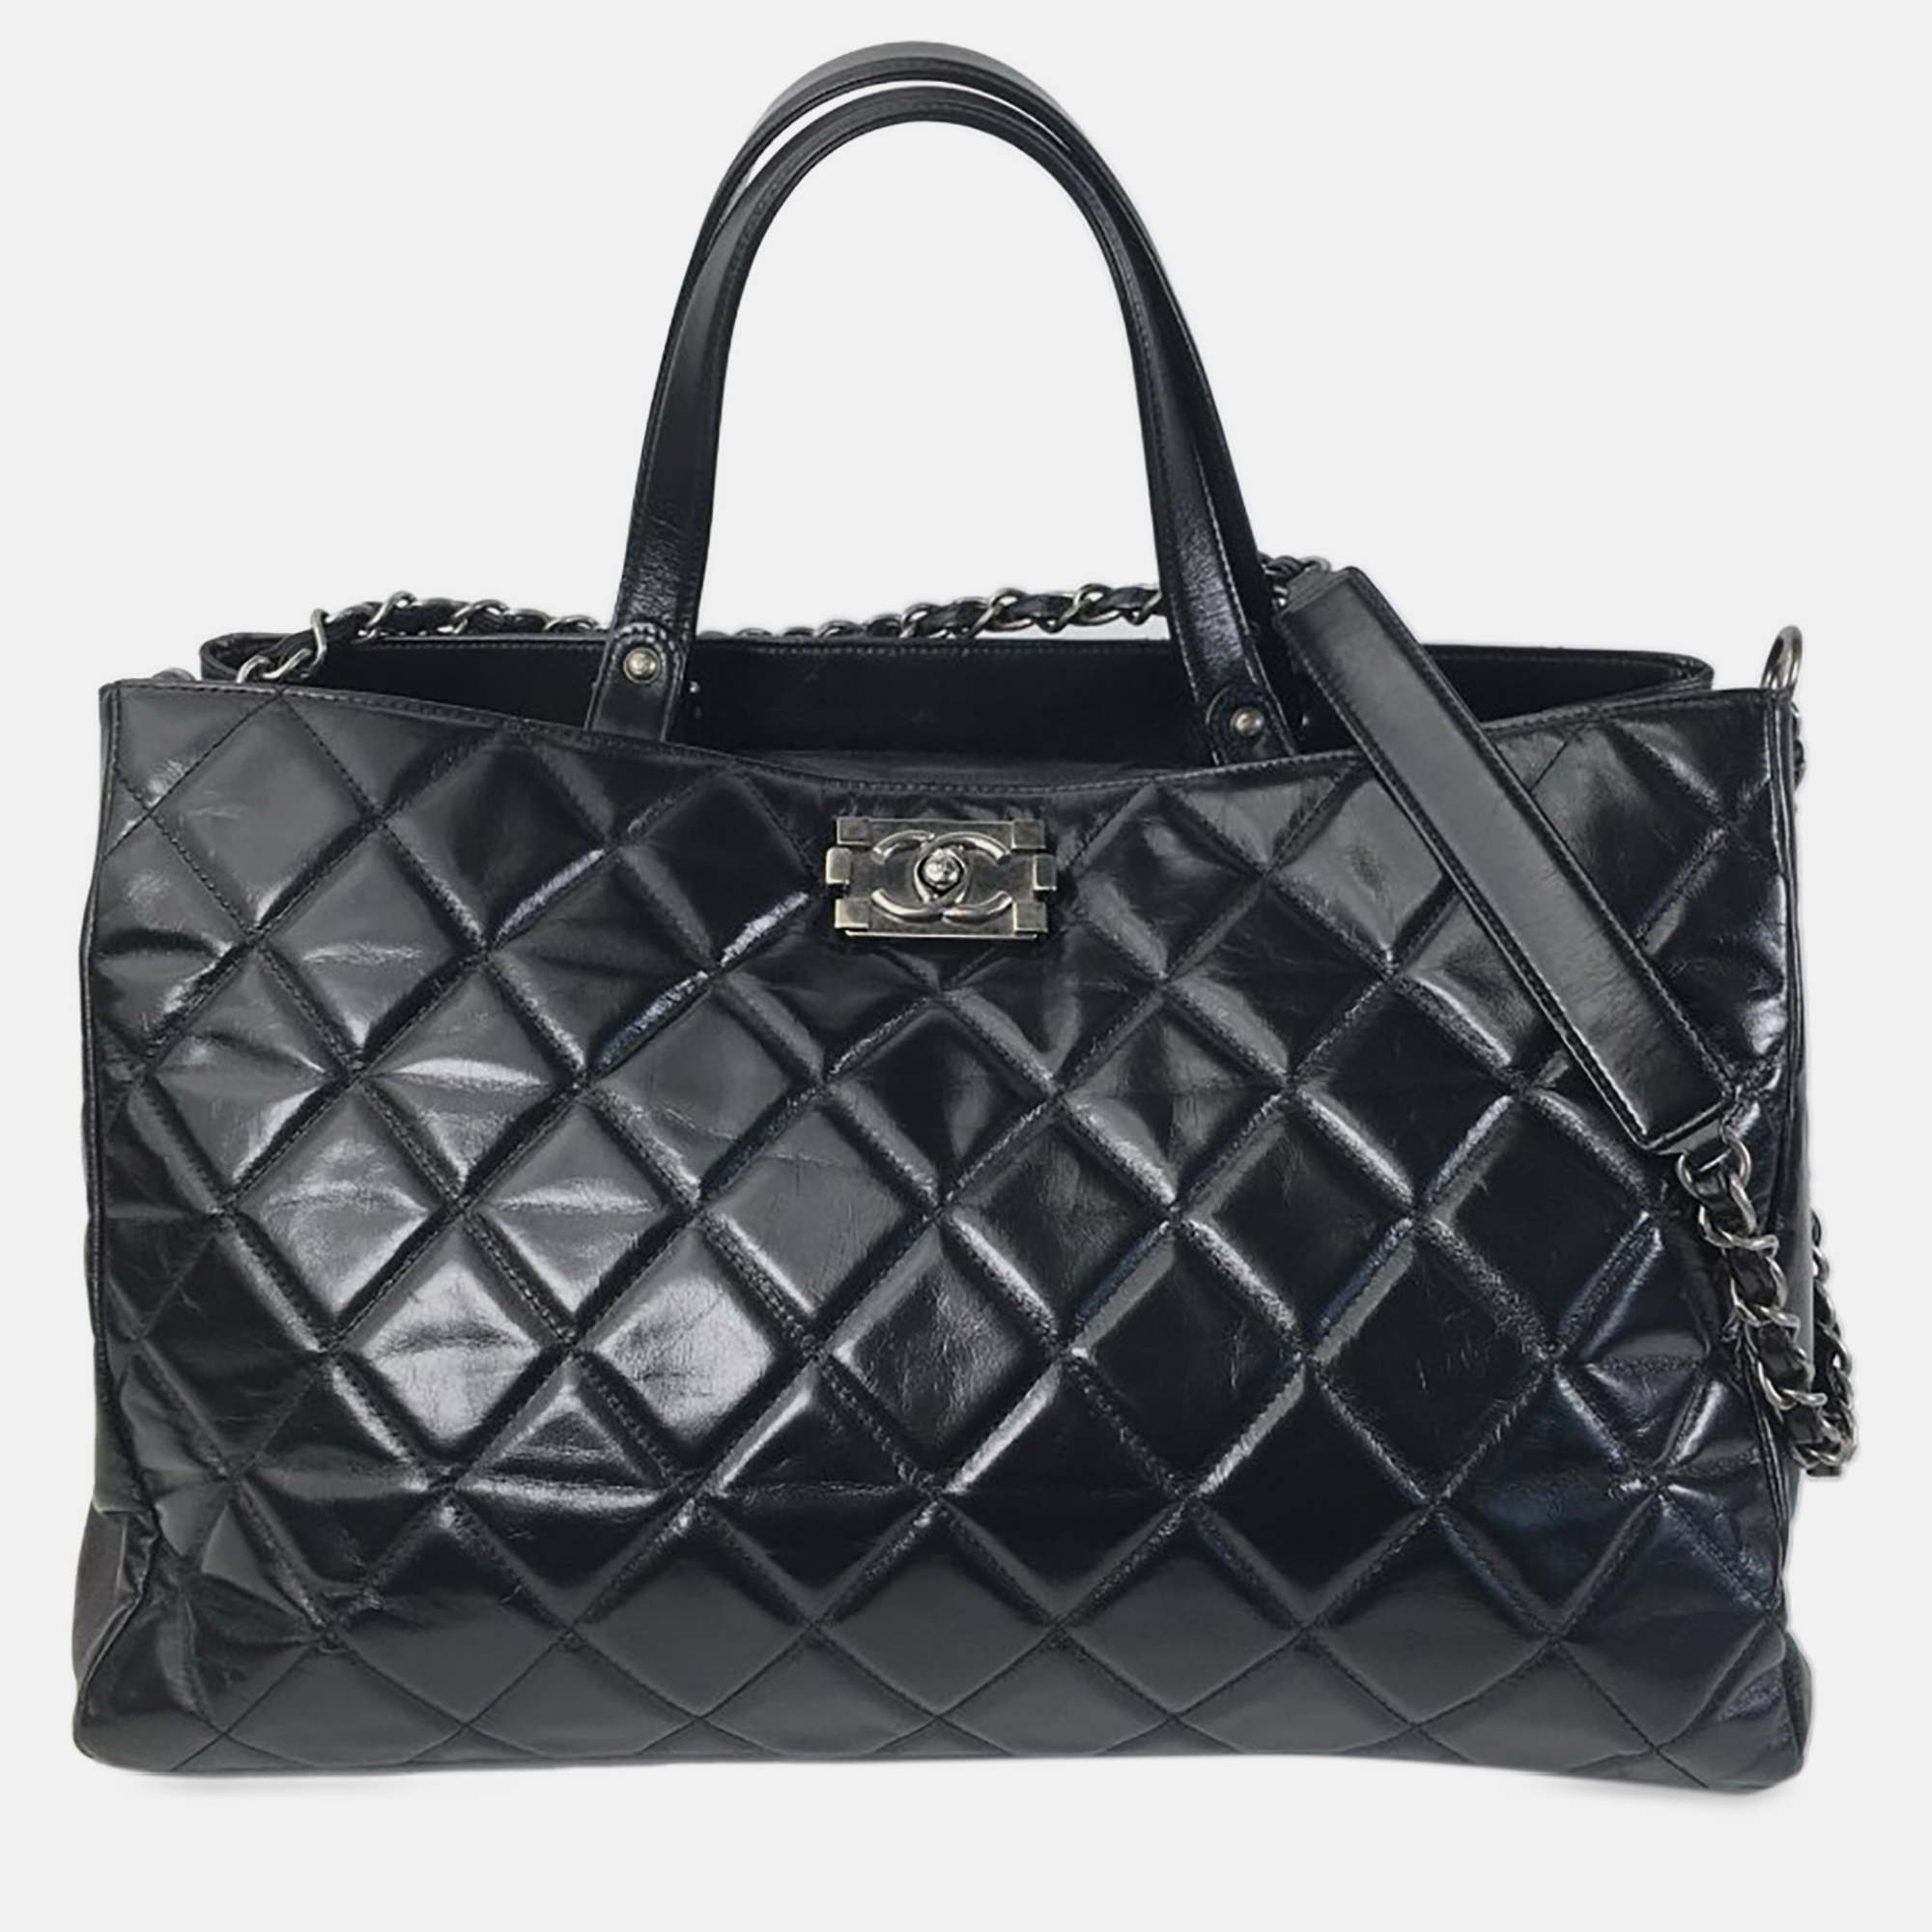 Chanel cc quilted calfskin satchel